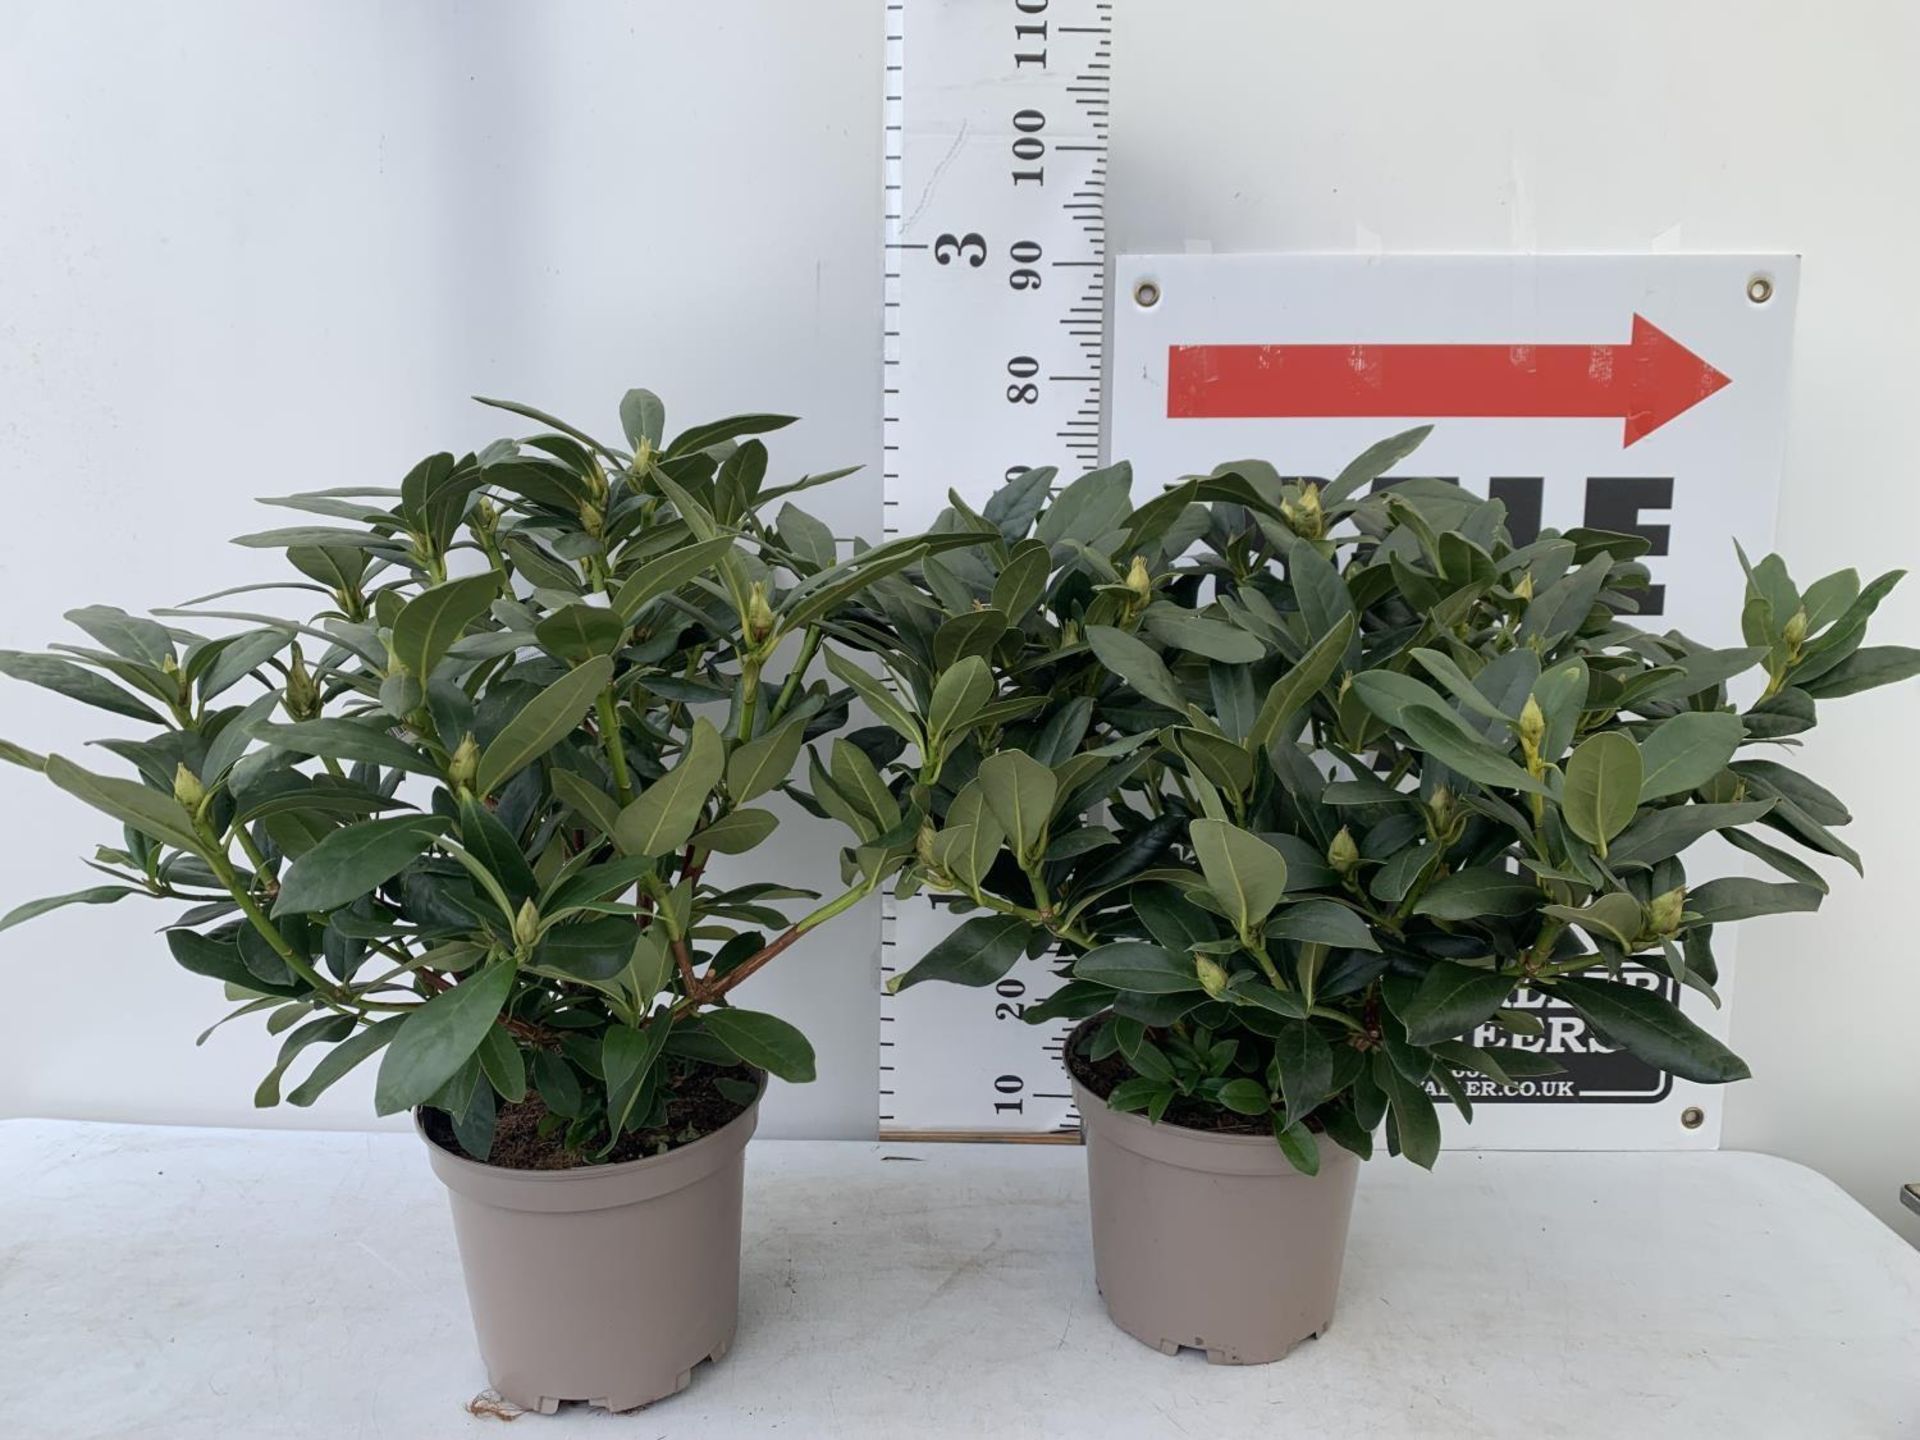 TWO RHODODENDRONS CUNNINGHAM'S WHITE IN 7.5 LTR POTS APPROX 70CM IN HEIGHT PLUS VAT TO BE SOLD FOR - Image 2 of 8